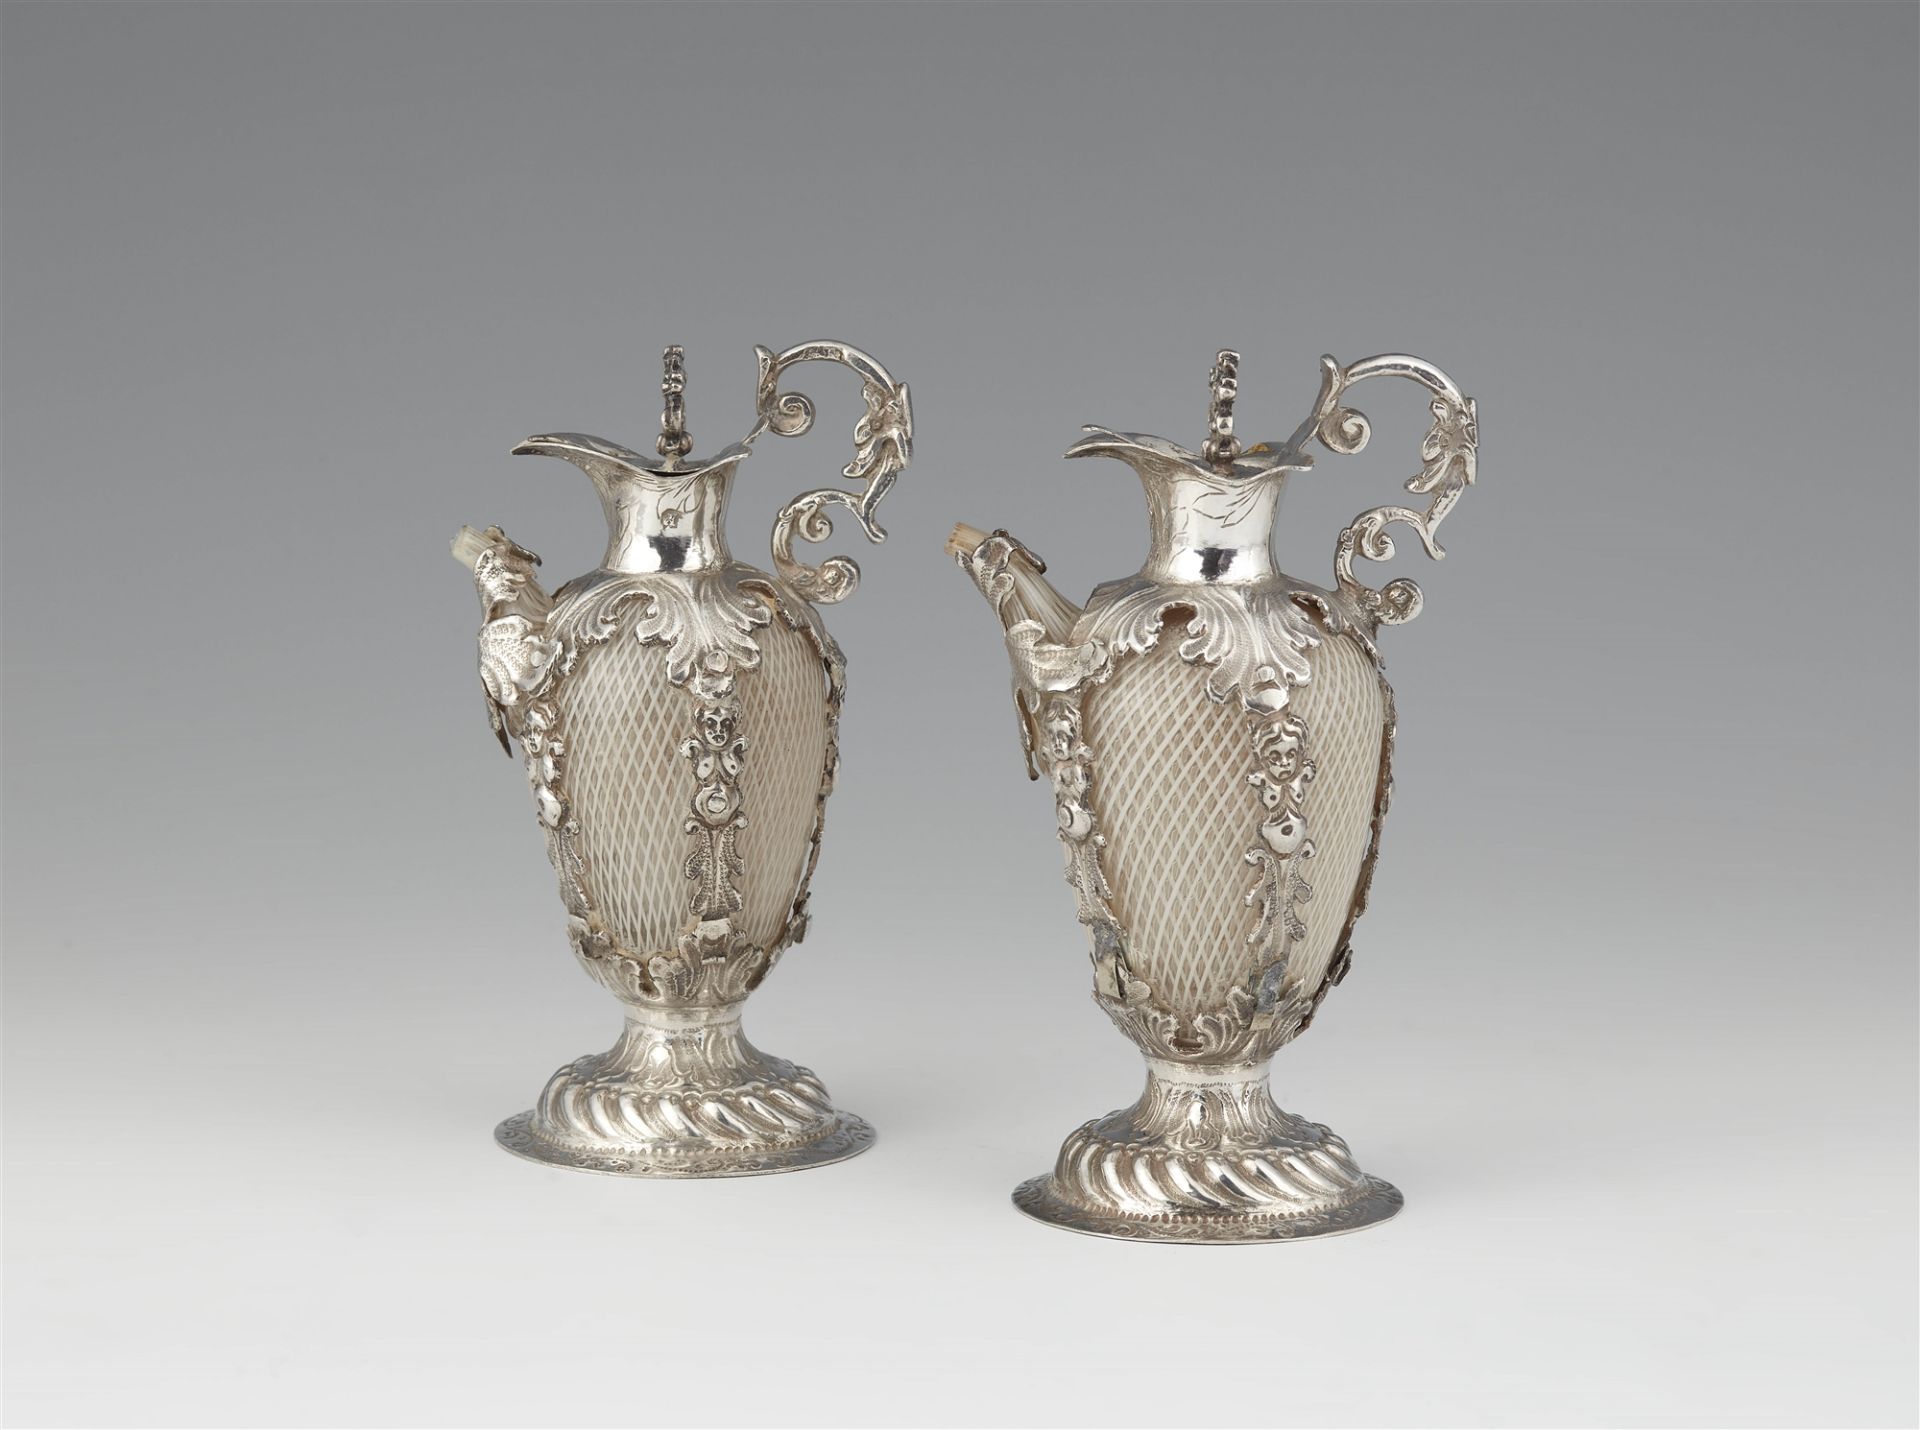 A pair of Venetian silver-mounted ewers in a fitted case